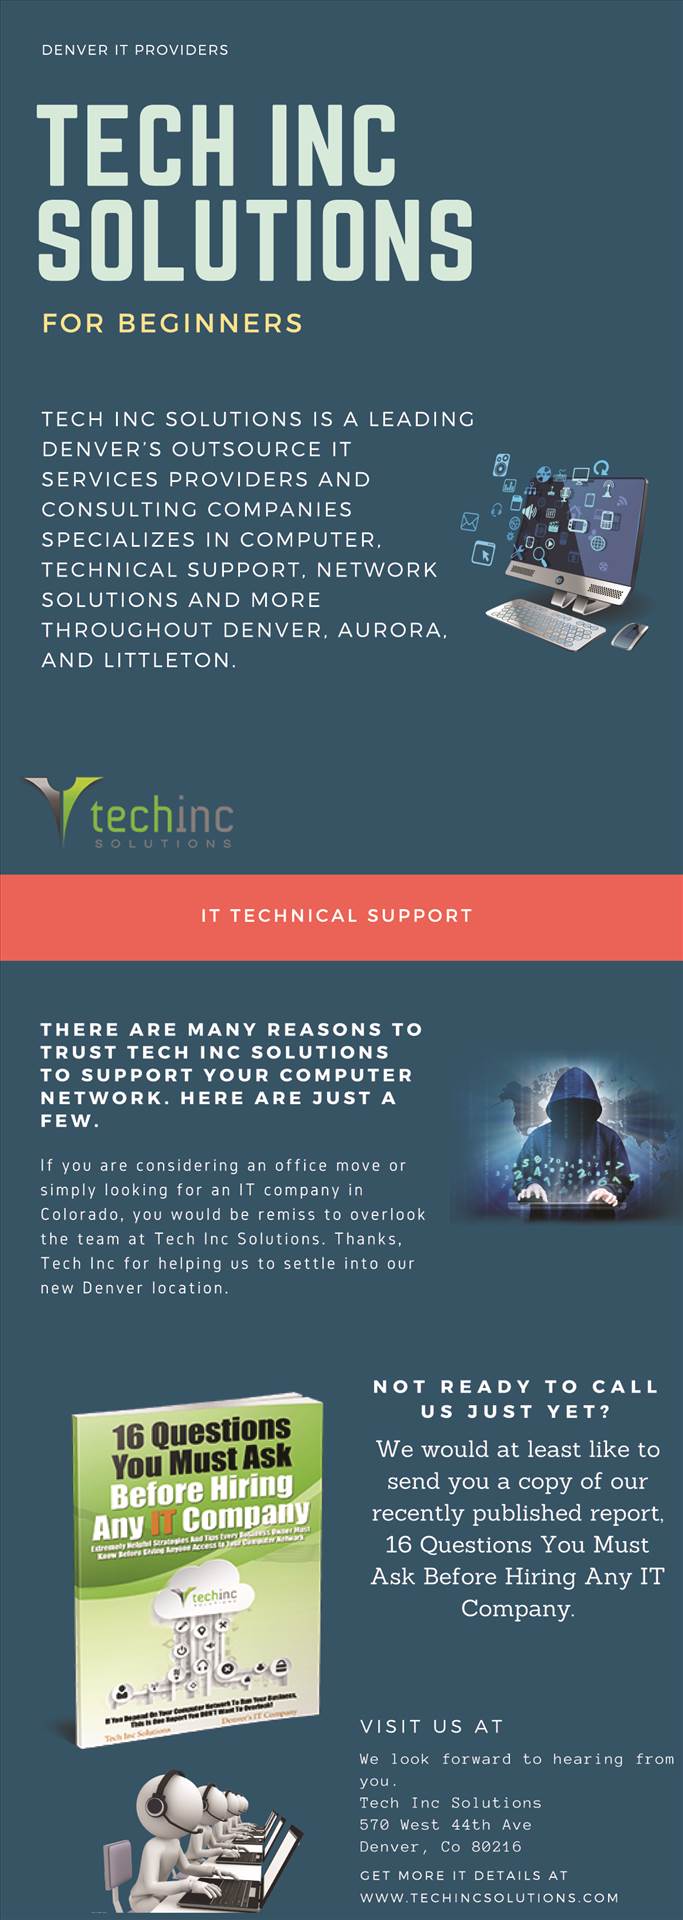 Managed IT Services Denver.jpg  by Techincsolutions